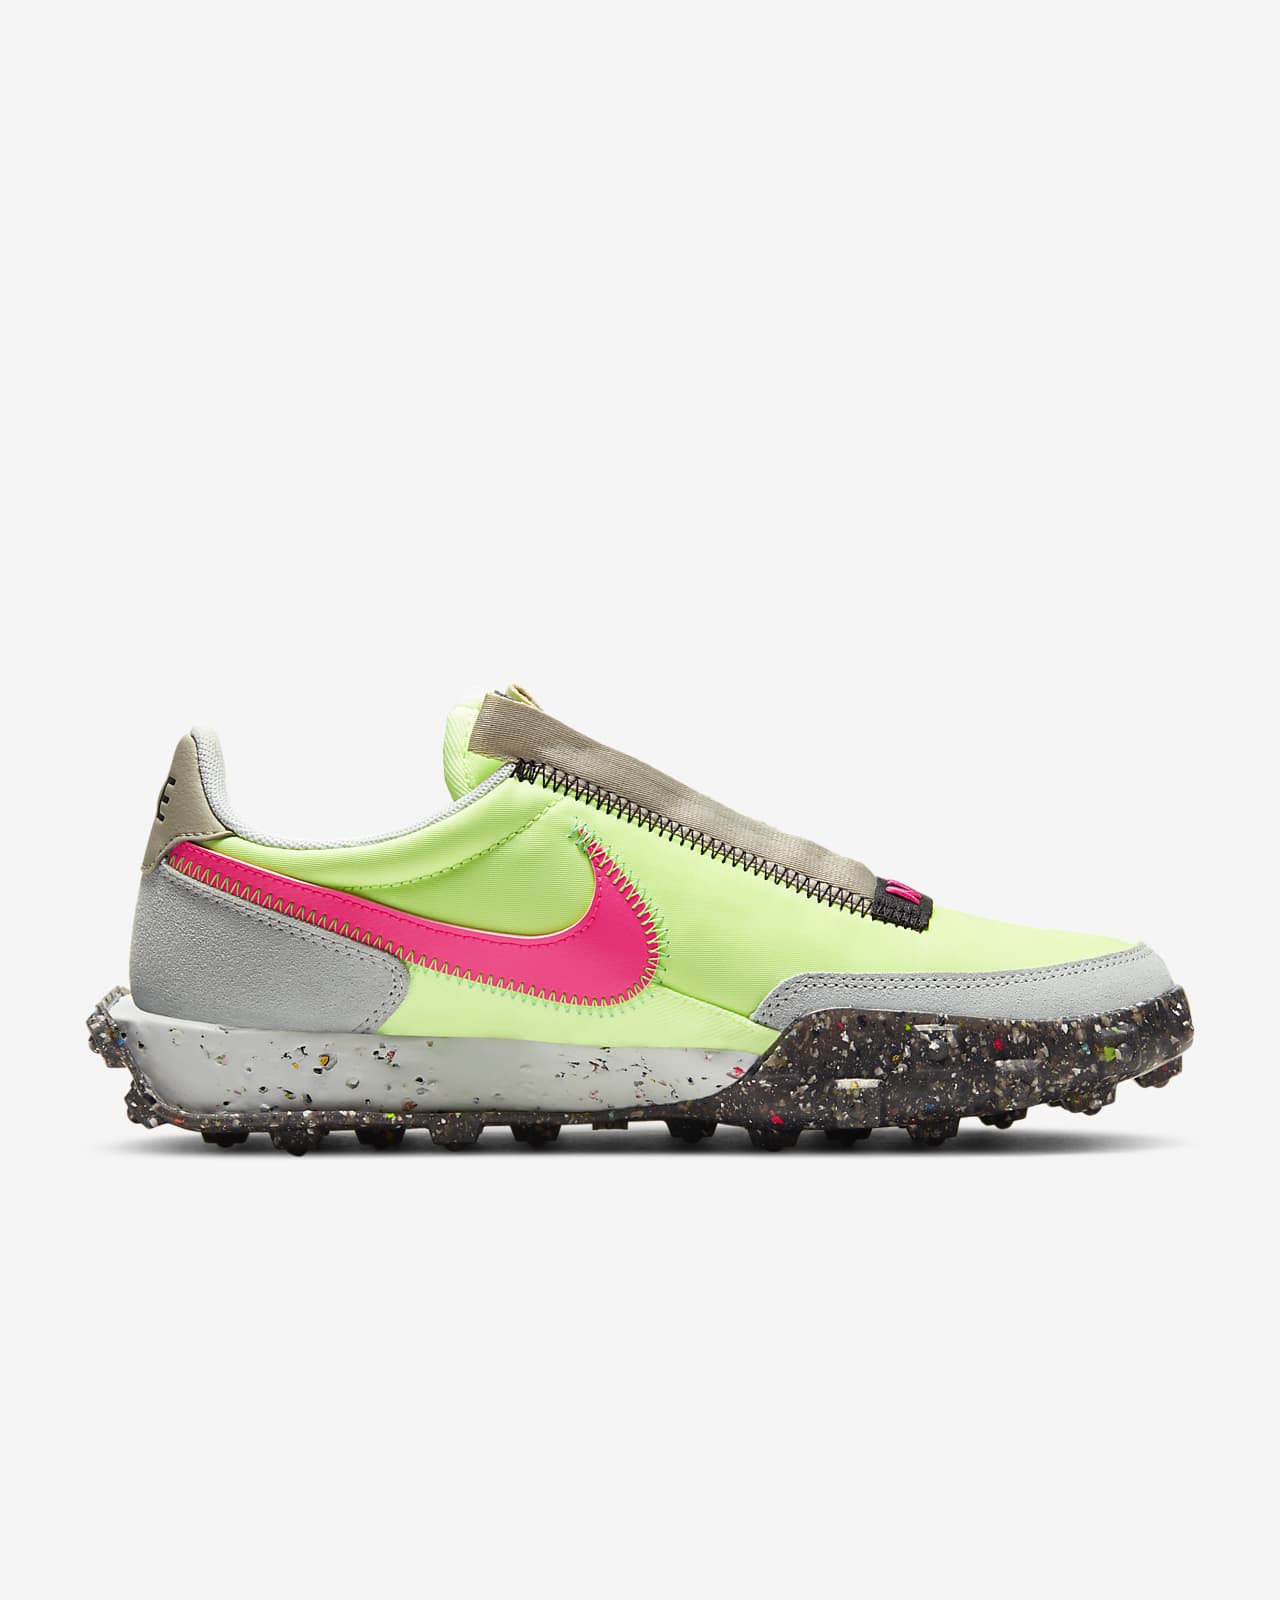 Women Nike Waffle Racer Crater Barely Volt